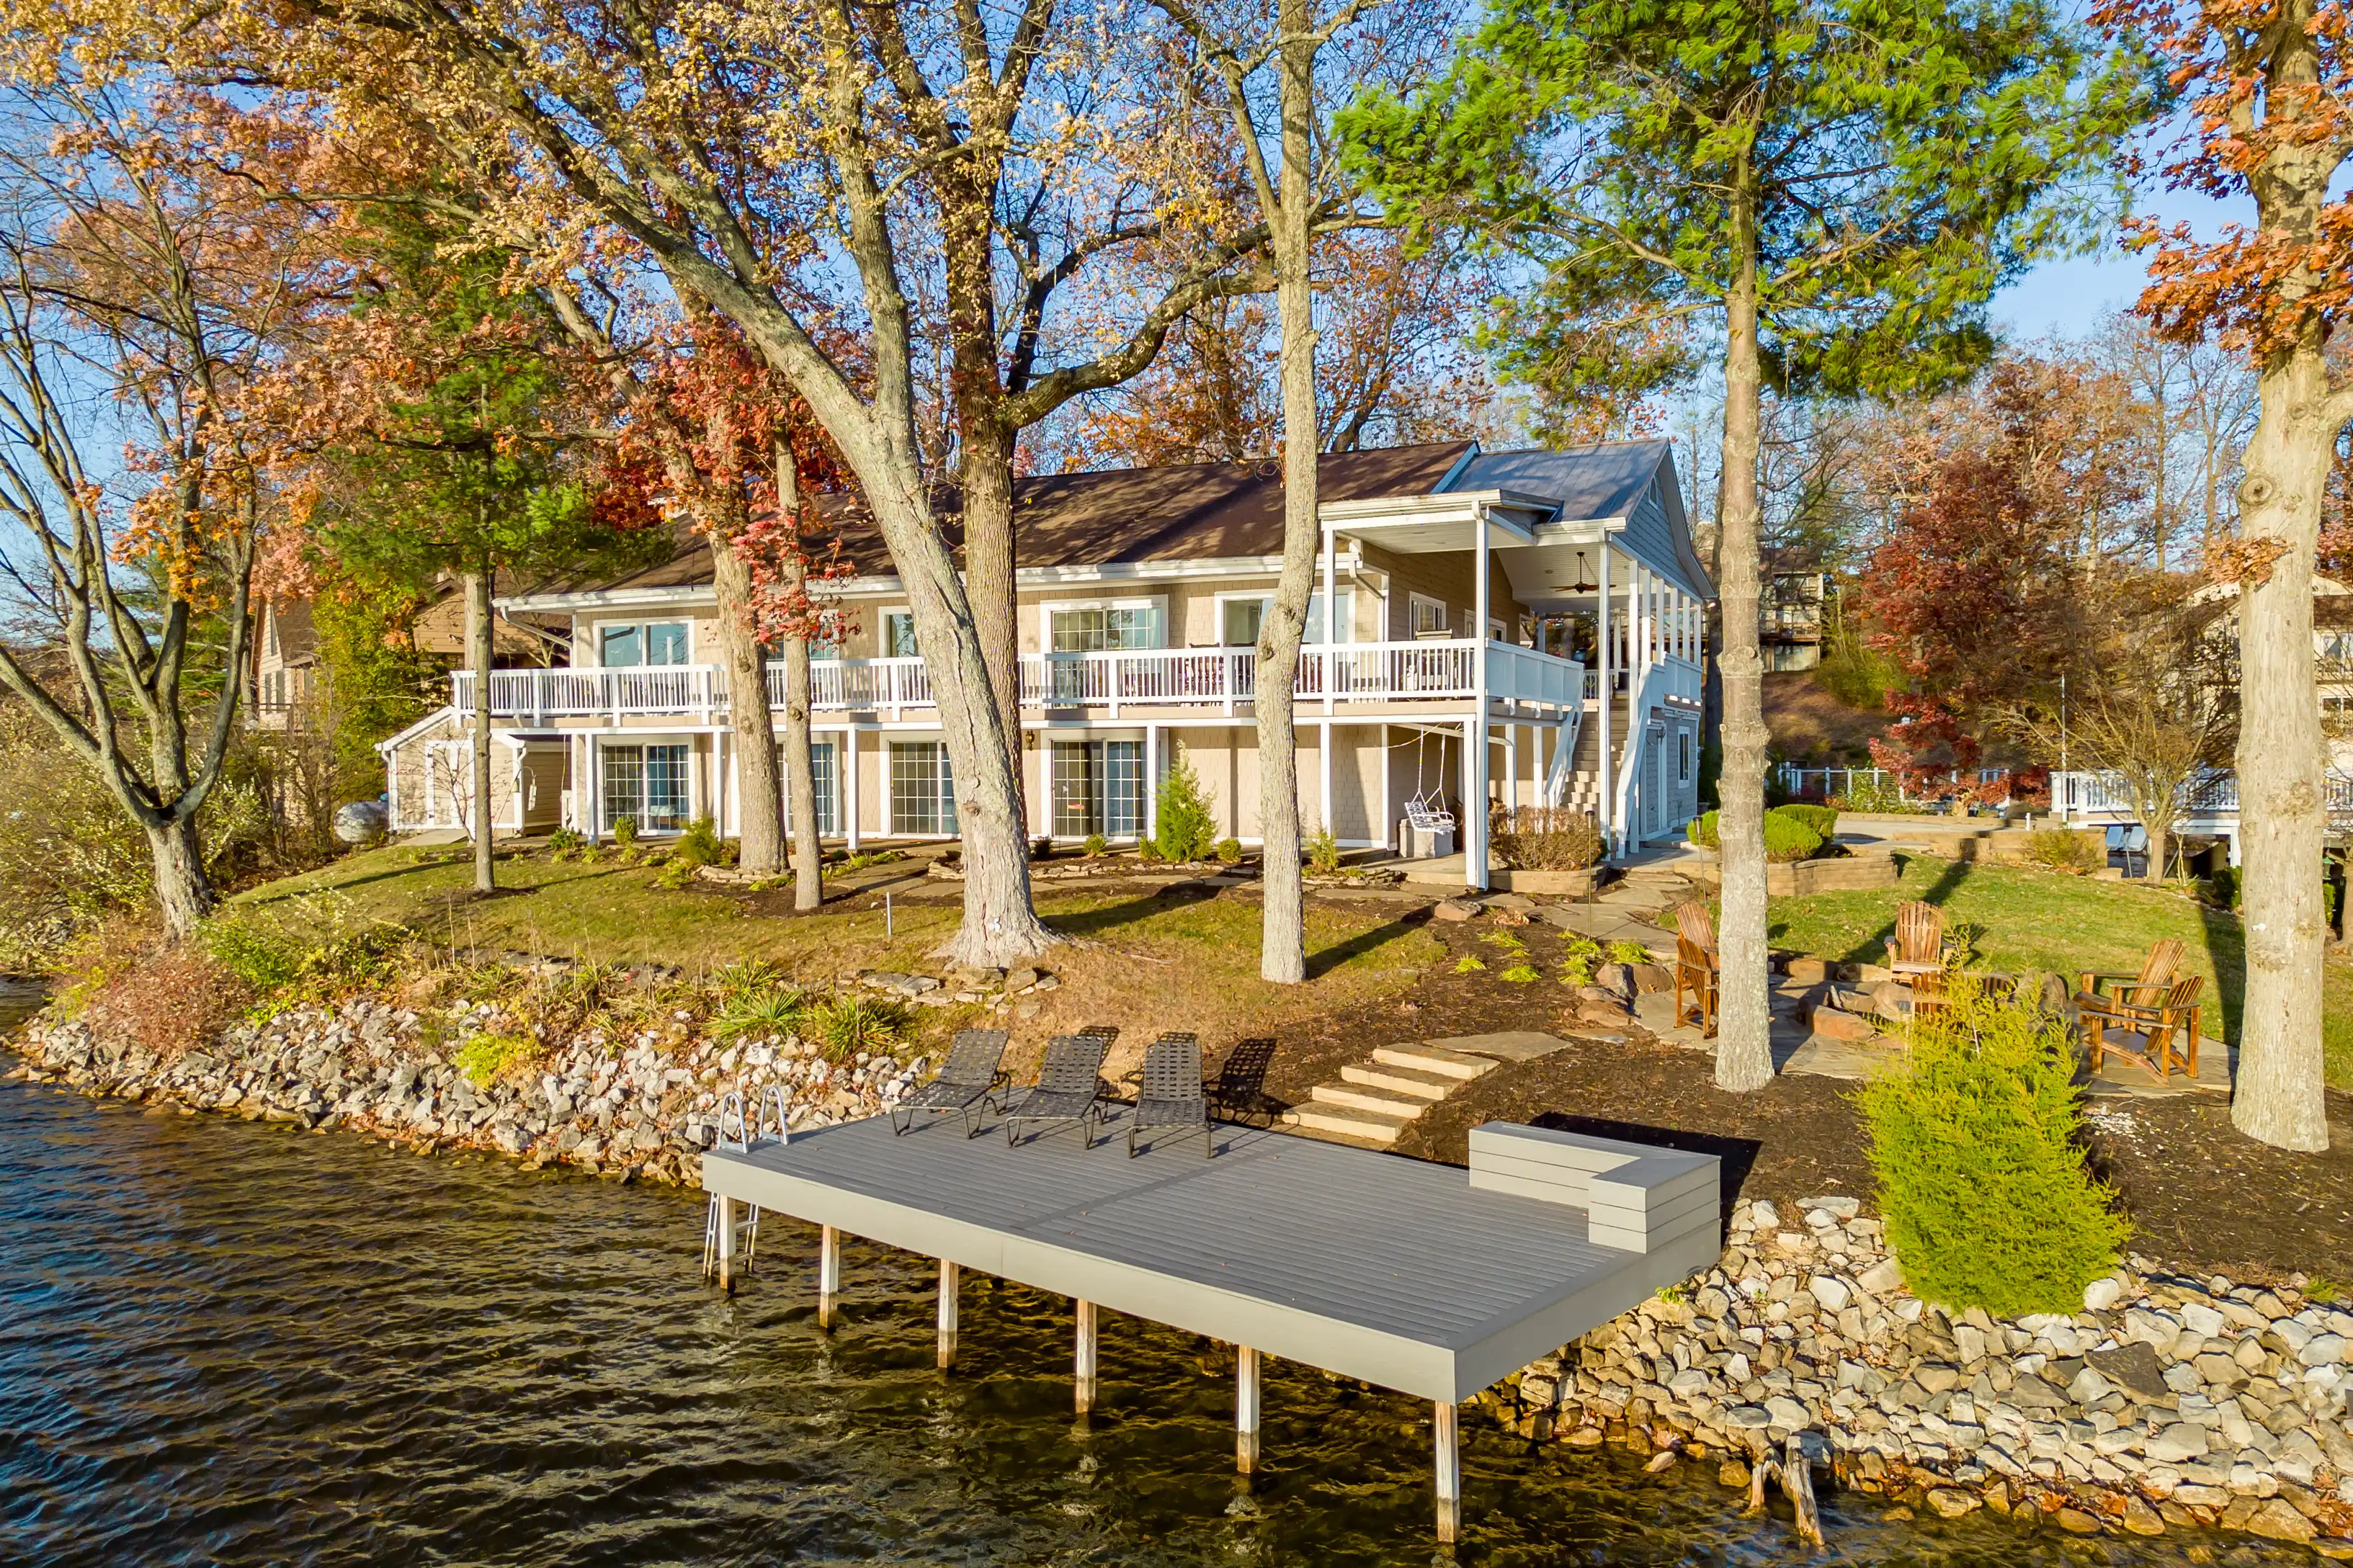 Lakeside two-story houses with balconies surrounded by autumn trees, a wooden dock with chairs on the foreground.